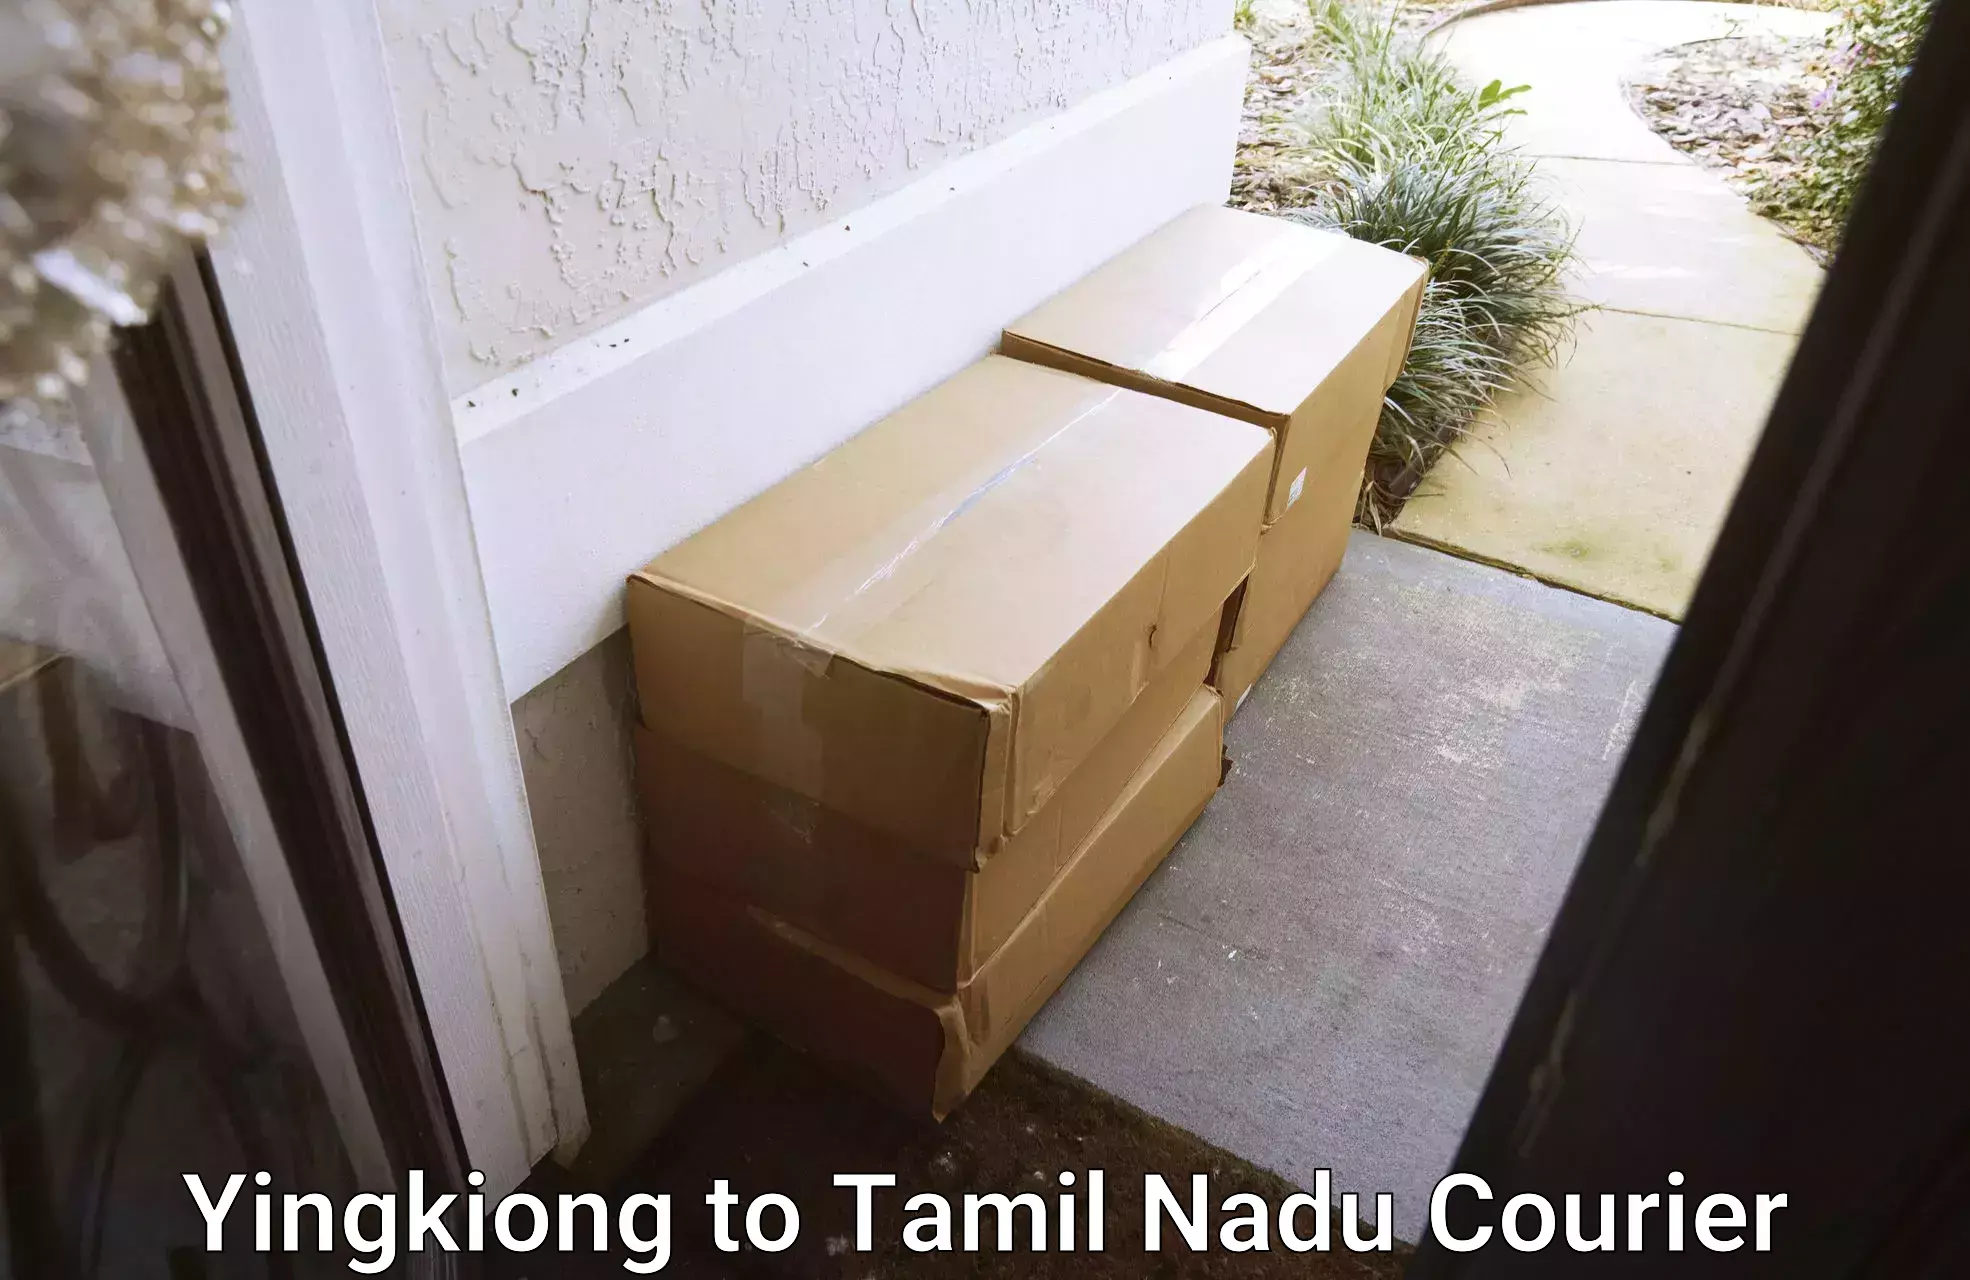 Nationwide parcel services Yingkiong to Memalur